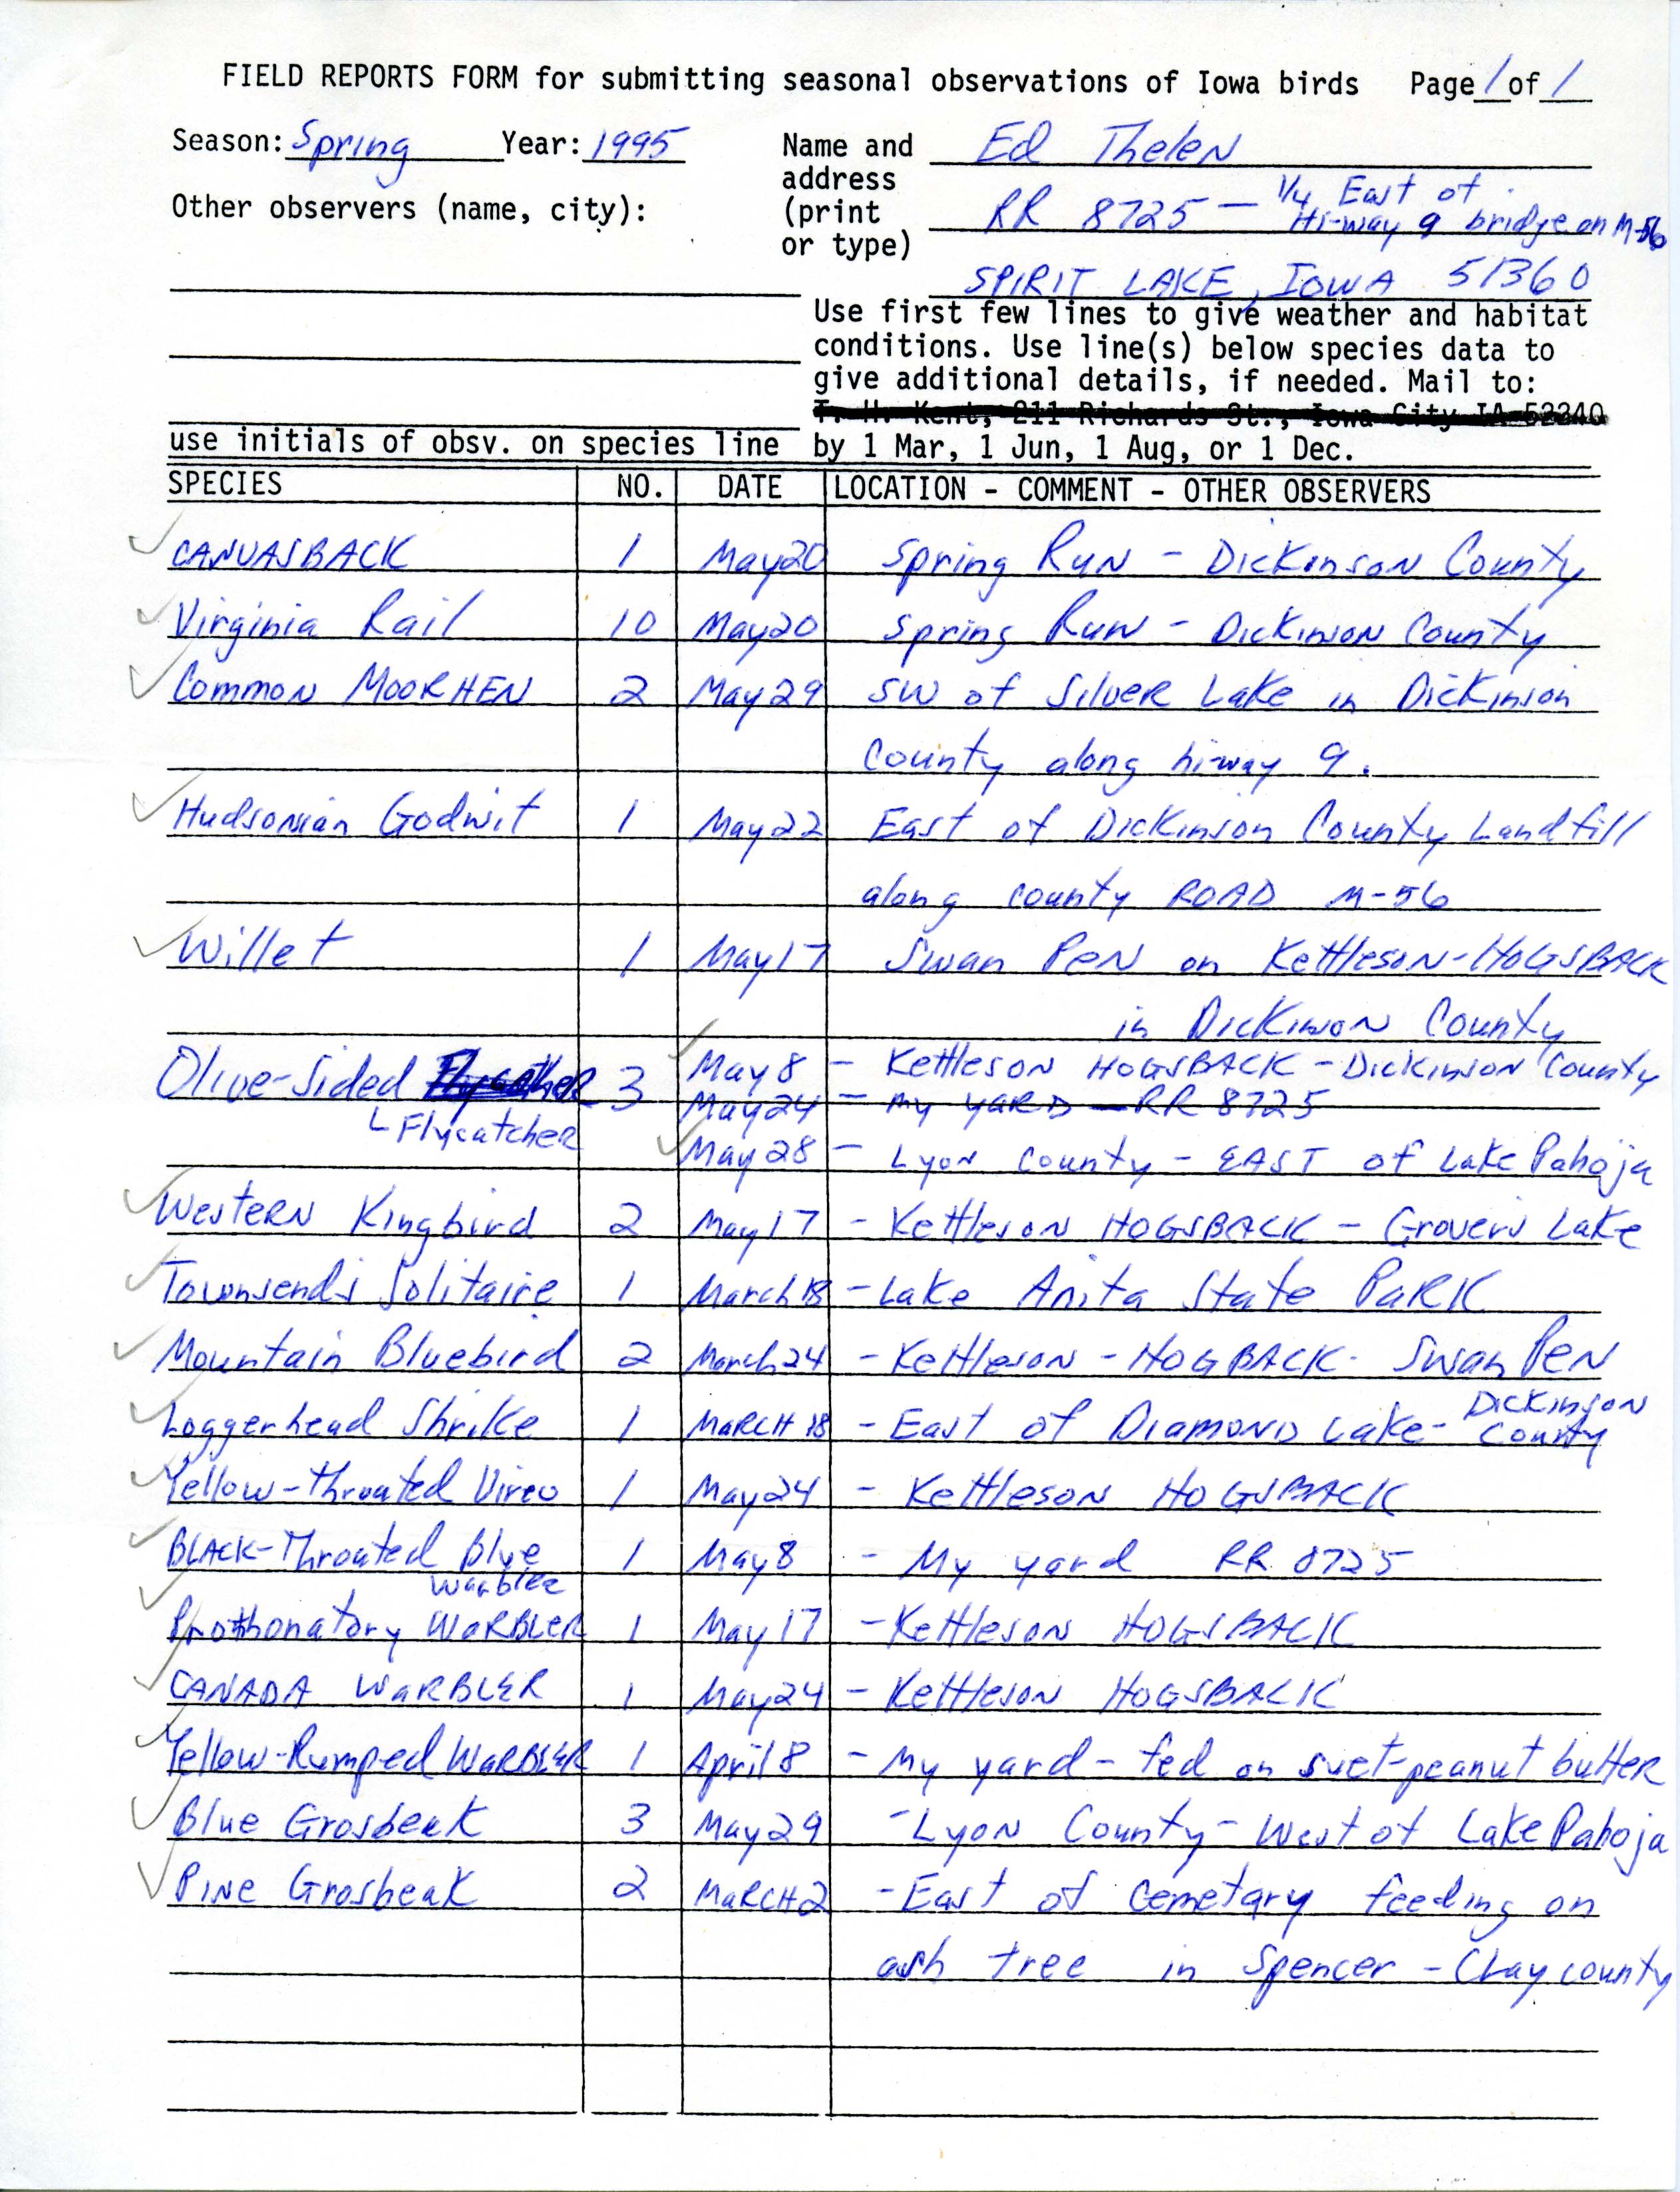 Field reports form for submitting seasonal observations of Iowa birds, spring 1995, Ed Thelen